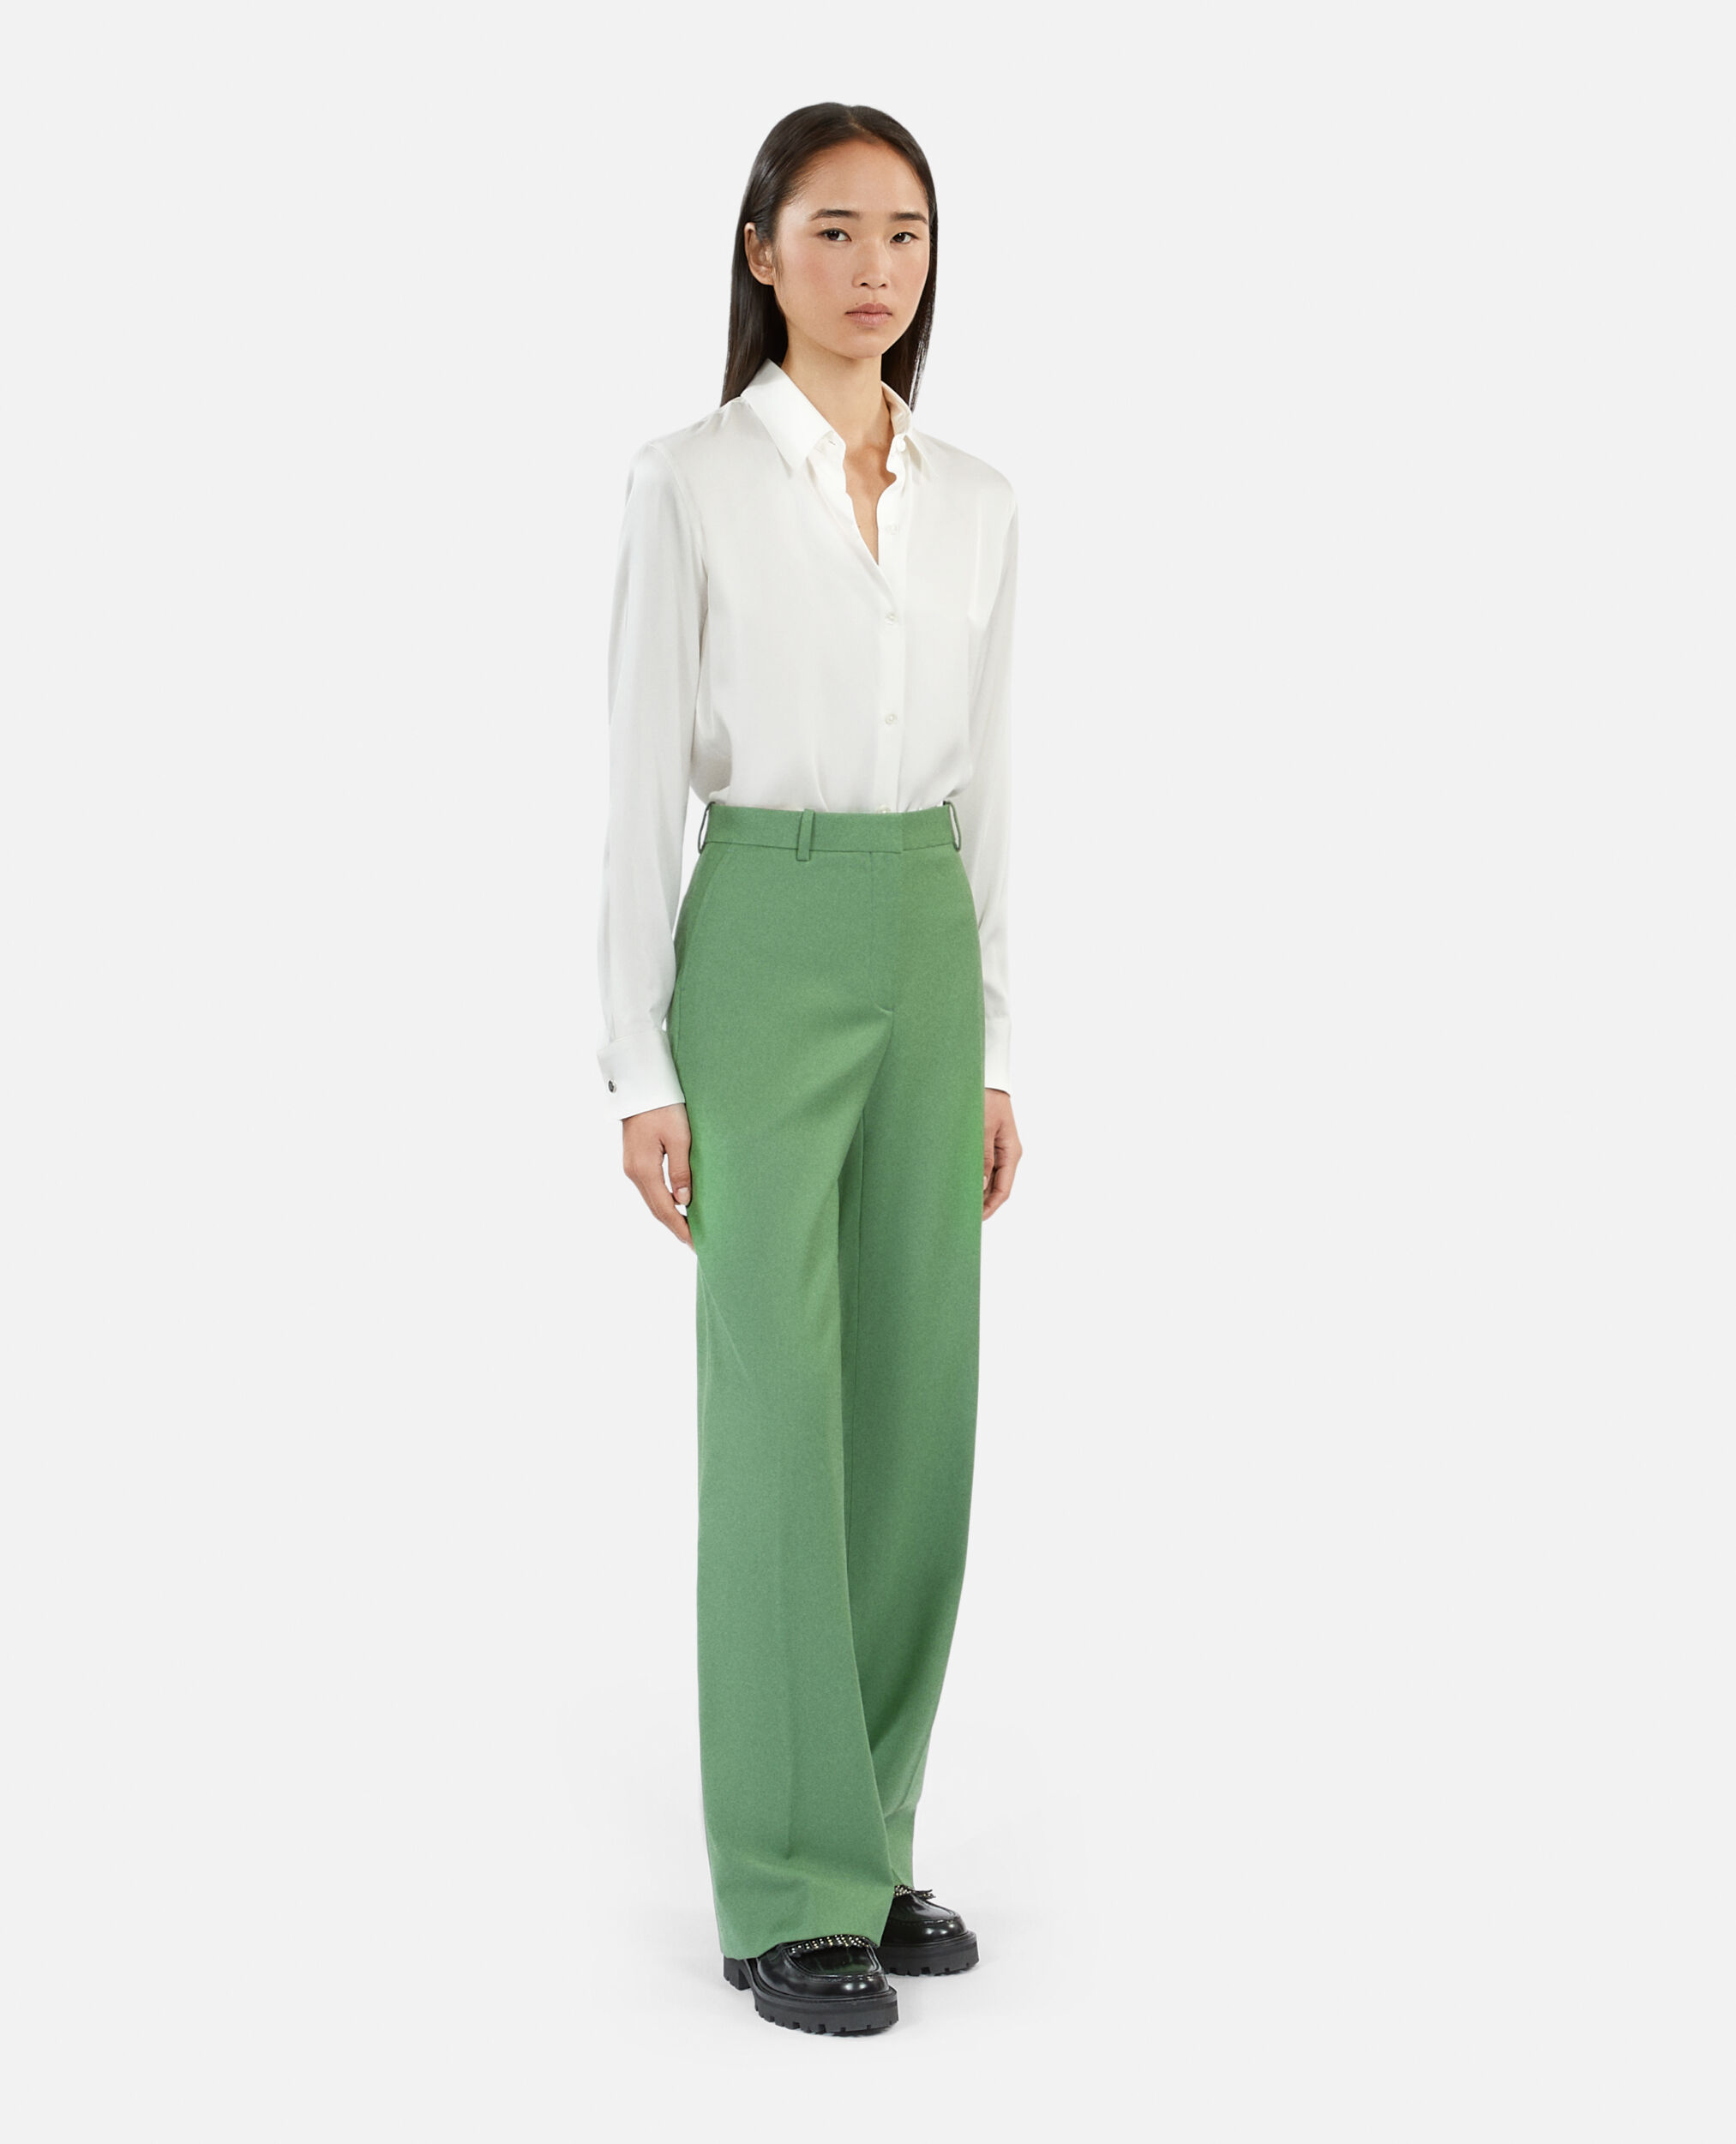 Green wool suit trousers, LIGHT KAKI, hi-res image number null